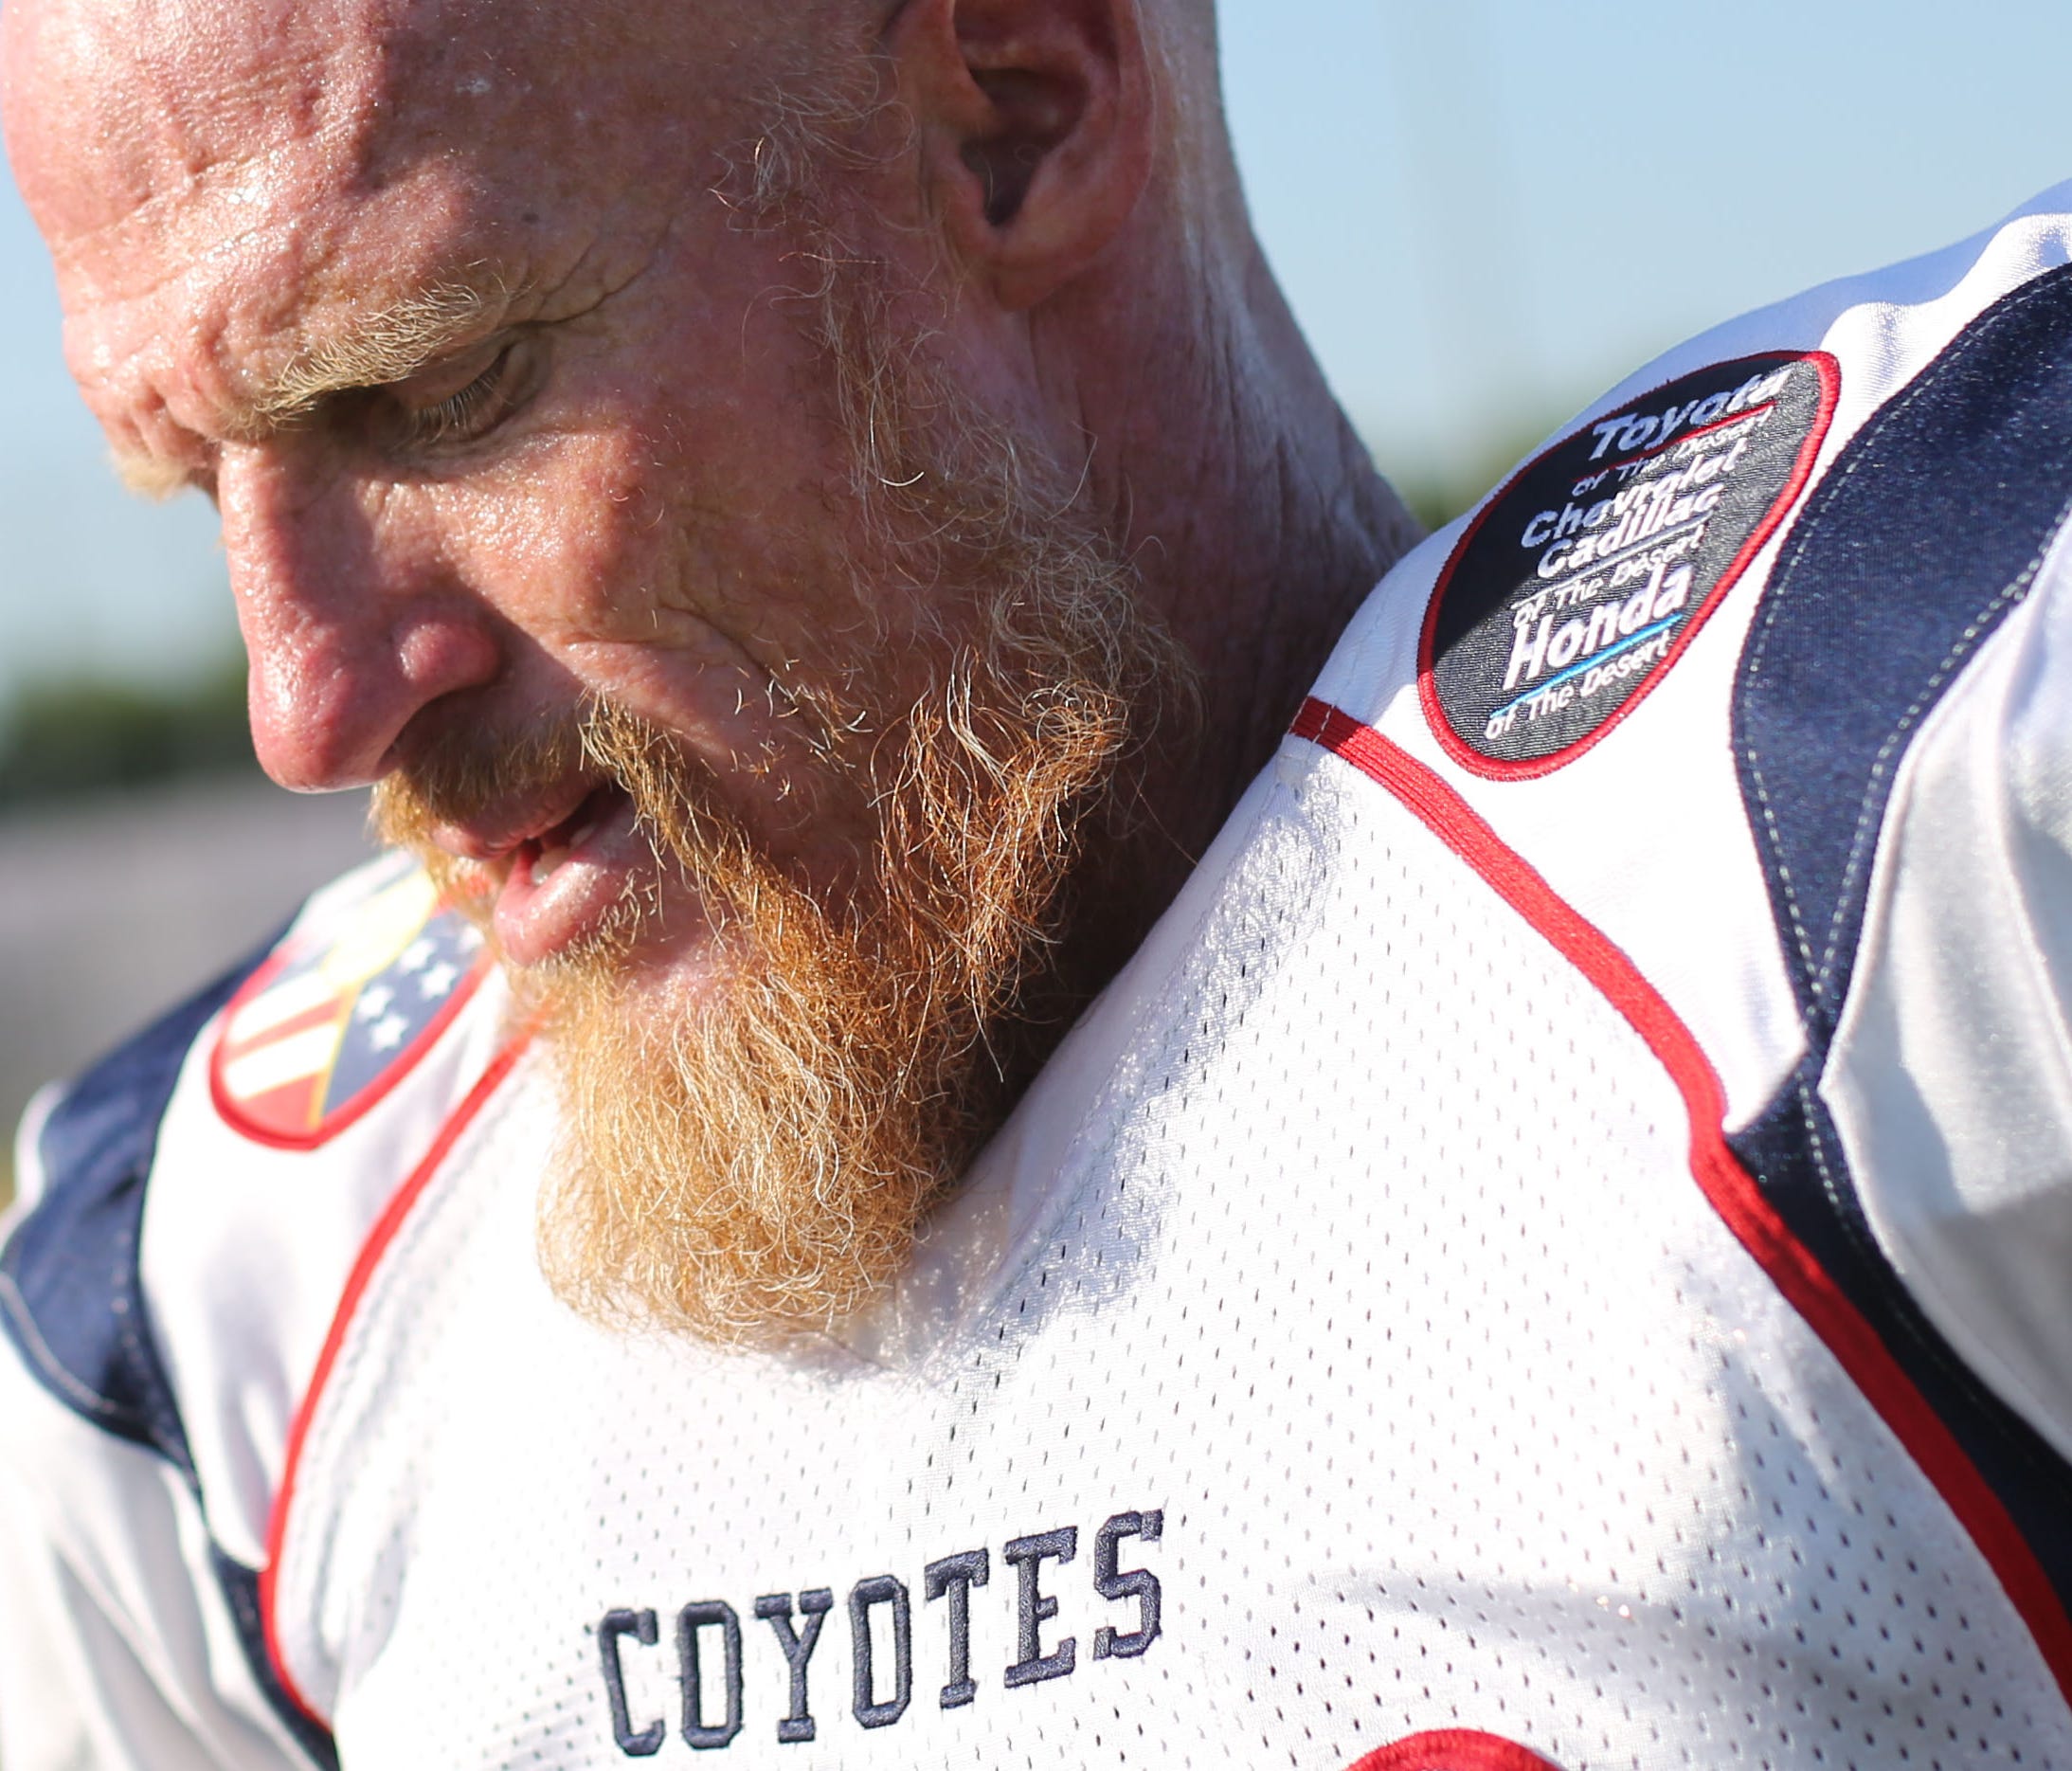 Former USC and Oakland Raiders quarterback Todd Marinovich, 48, at practice with his team the SoCal Coyotes on Saturday, August 12, 2017 in Indio.